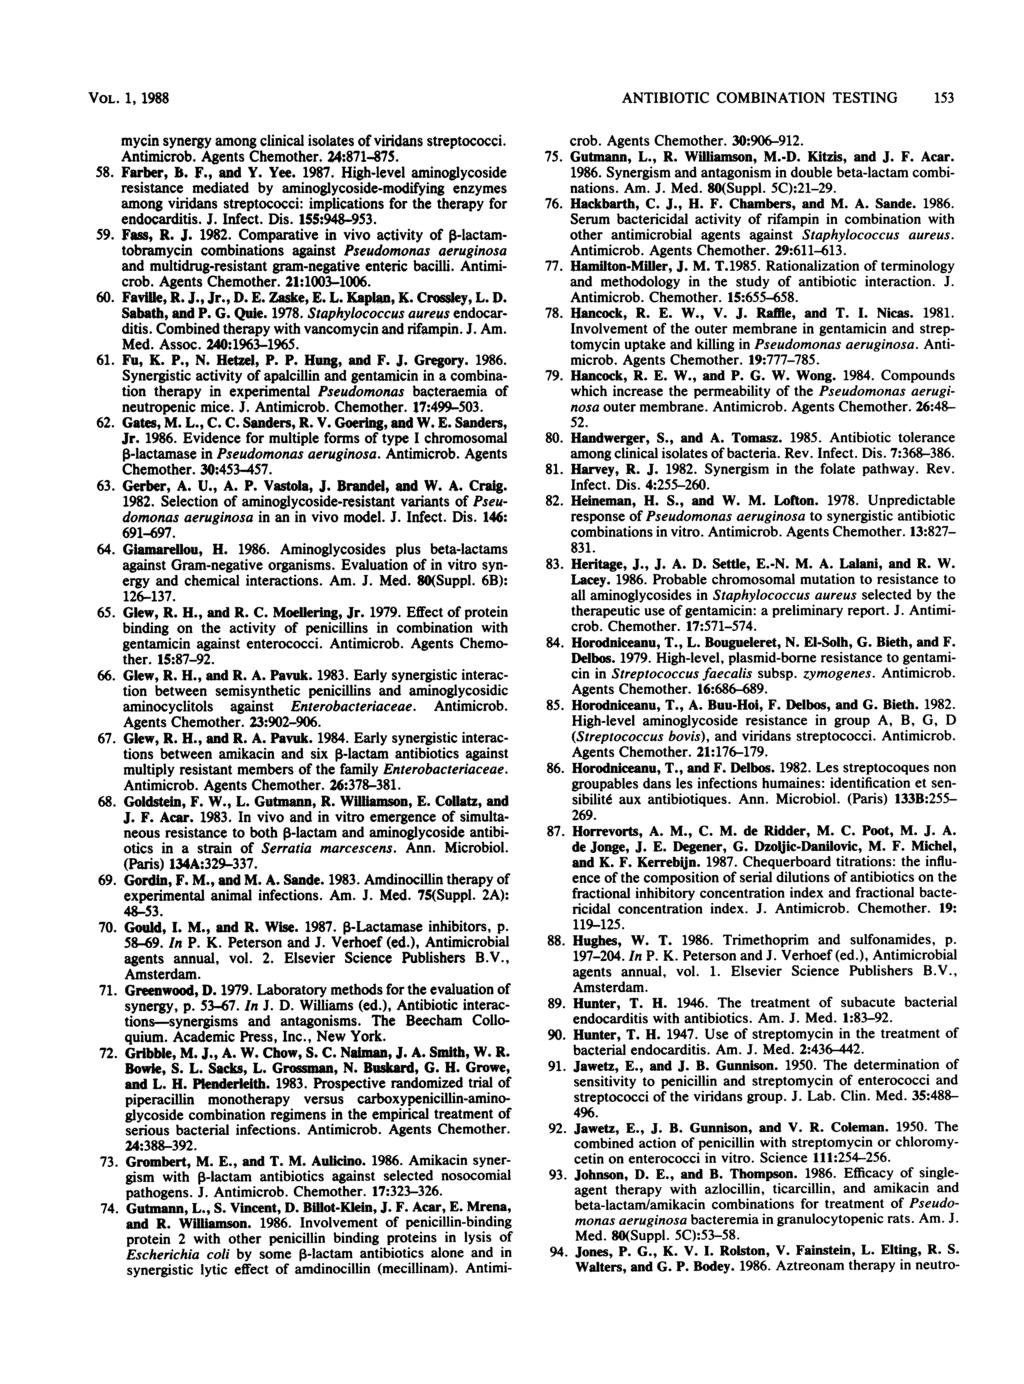 VOL. 1, 1988 mycin synergy among clinical isolates of viridans streptococci. Antimicrob. Agents Chemother. 24:871-875. 58. Farber, B. F., and Y. Yee. 1987.